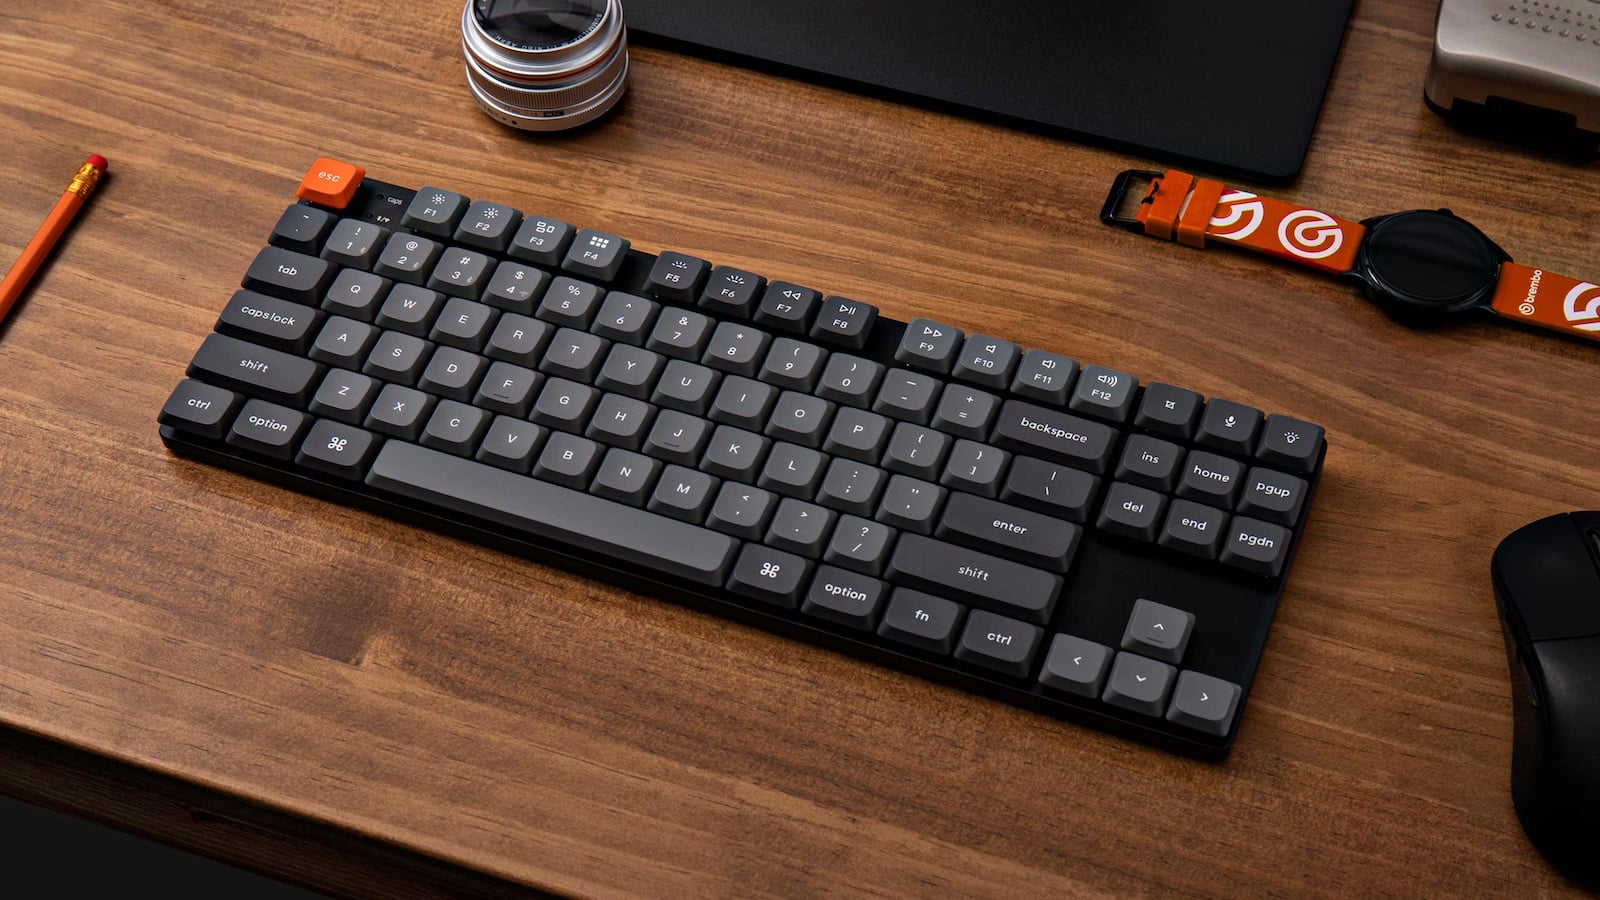 The Keychron K1 Max keyboard is low profile and wireless